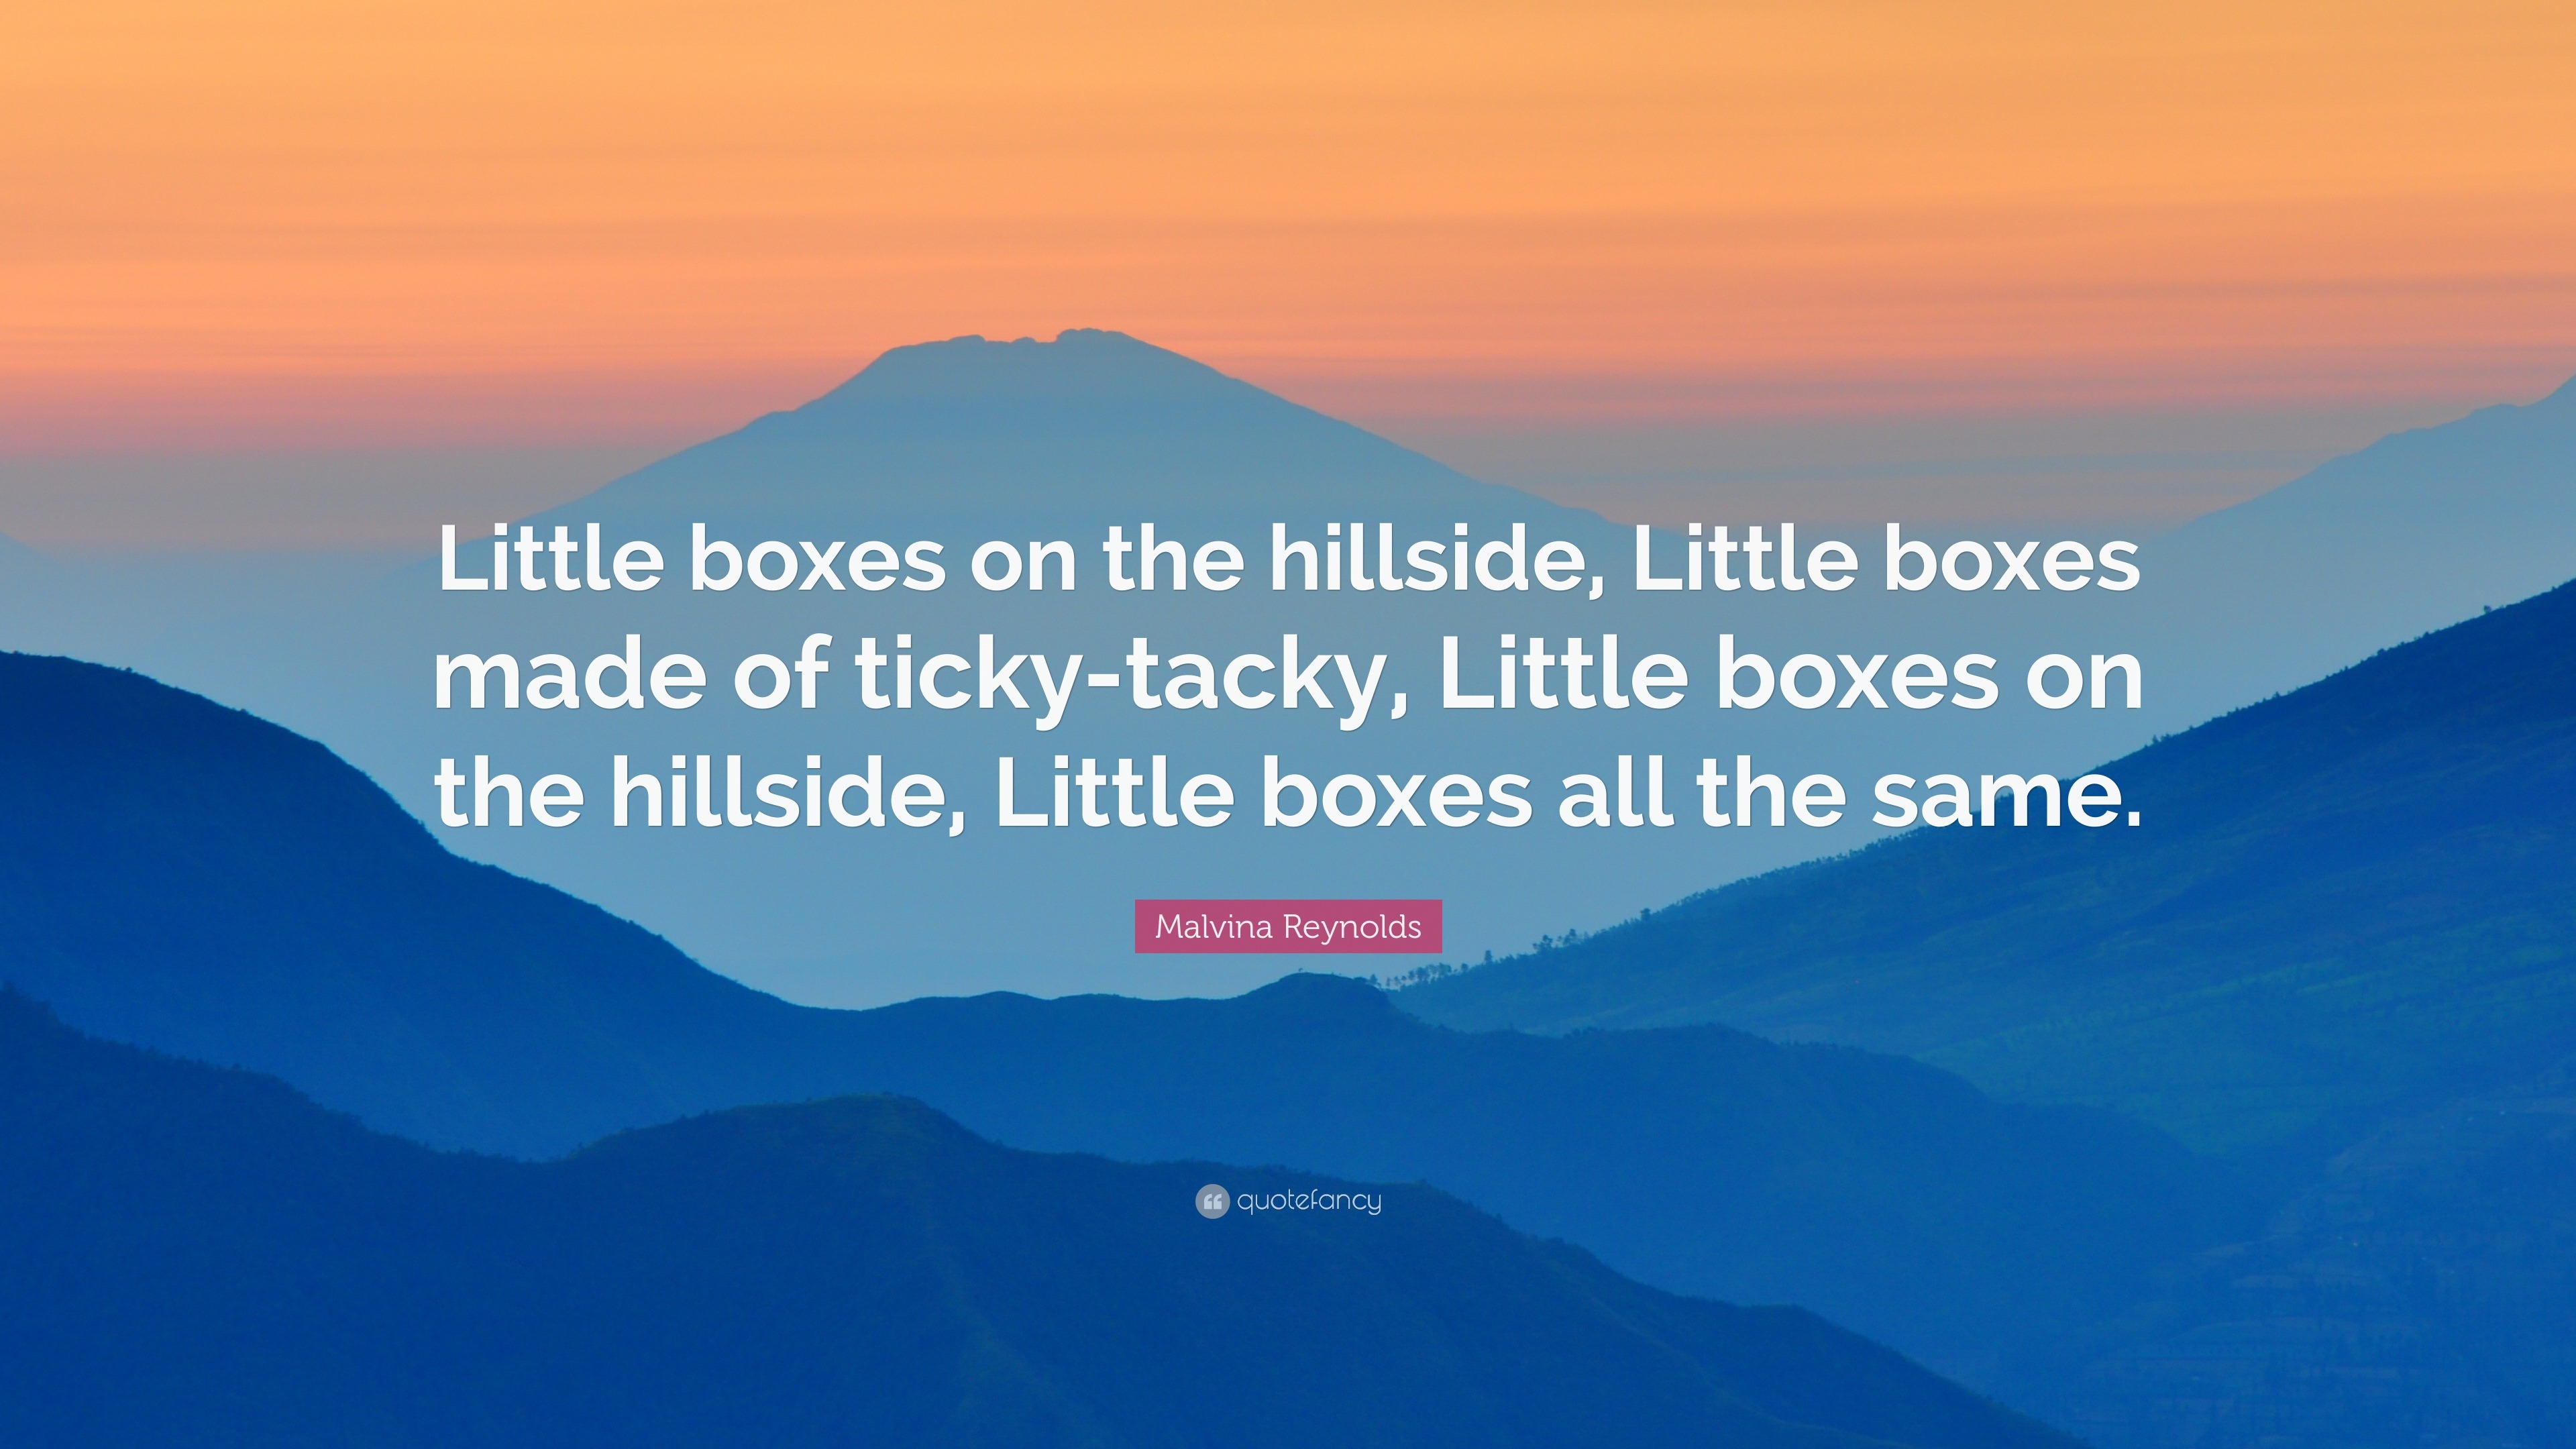 Malvina Reynolds Quote Little Boxes On The Hillside Little Boxes Made Of Ticky Tacky Little Boxes On The Hillside Little Boxes All The Same 7 Wallpapers Quotefancy